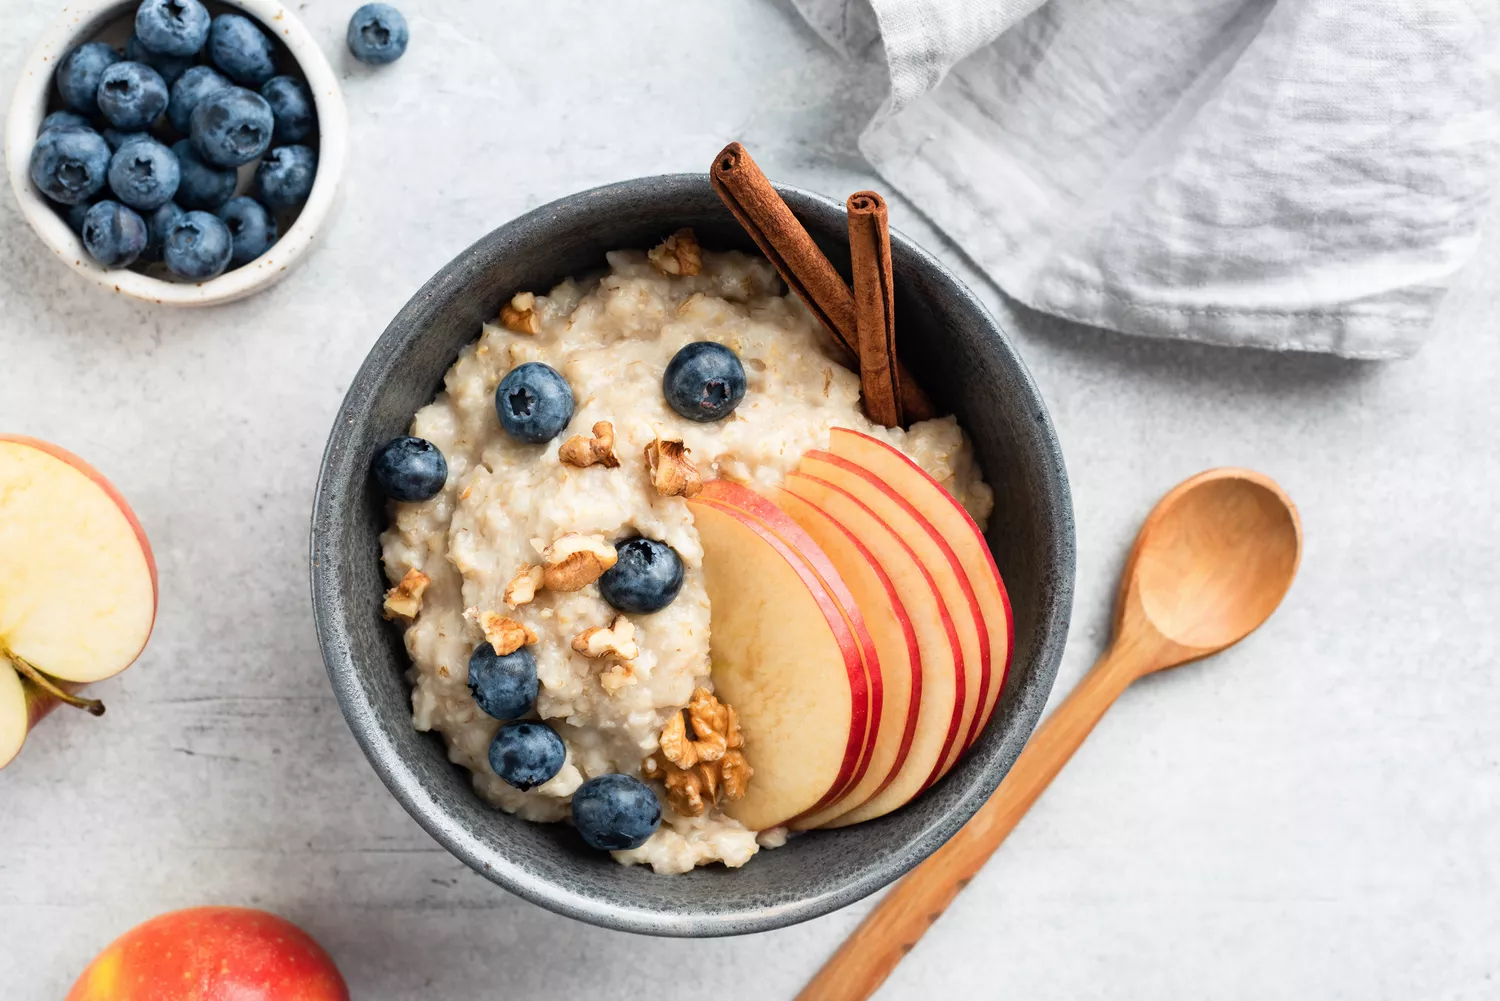 A bowl of oatmeal topped with apple, blueberries and nuts. Sitting on a counter beside a spoon, dish towel and fruit.